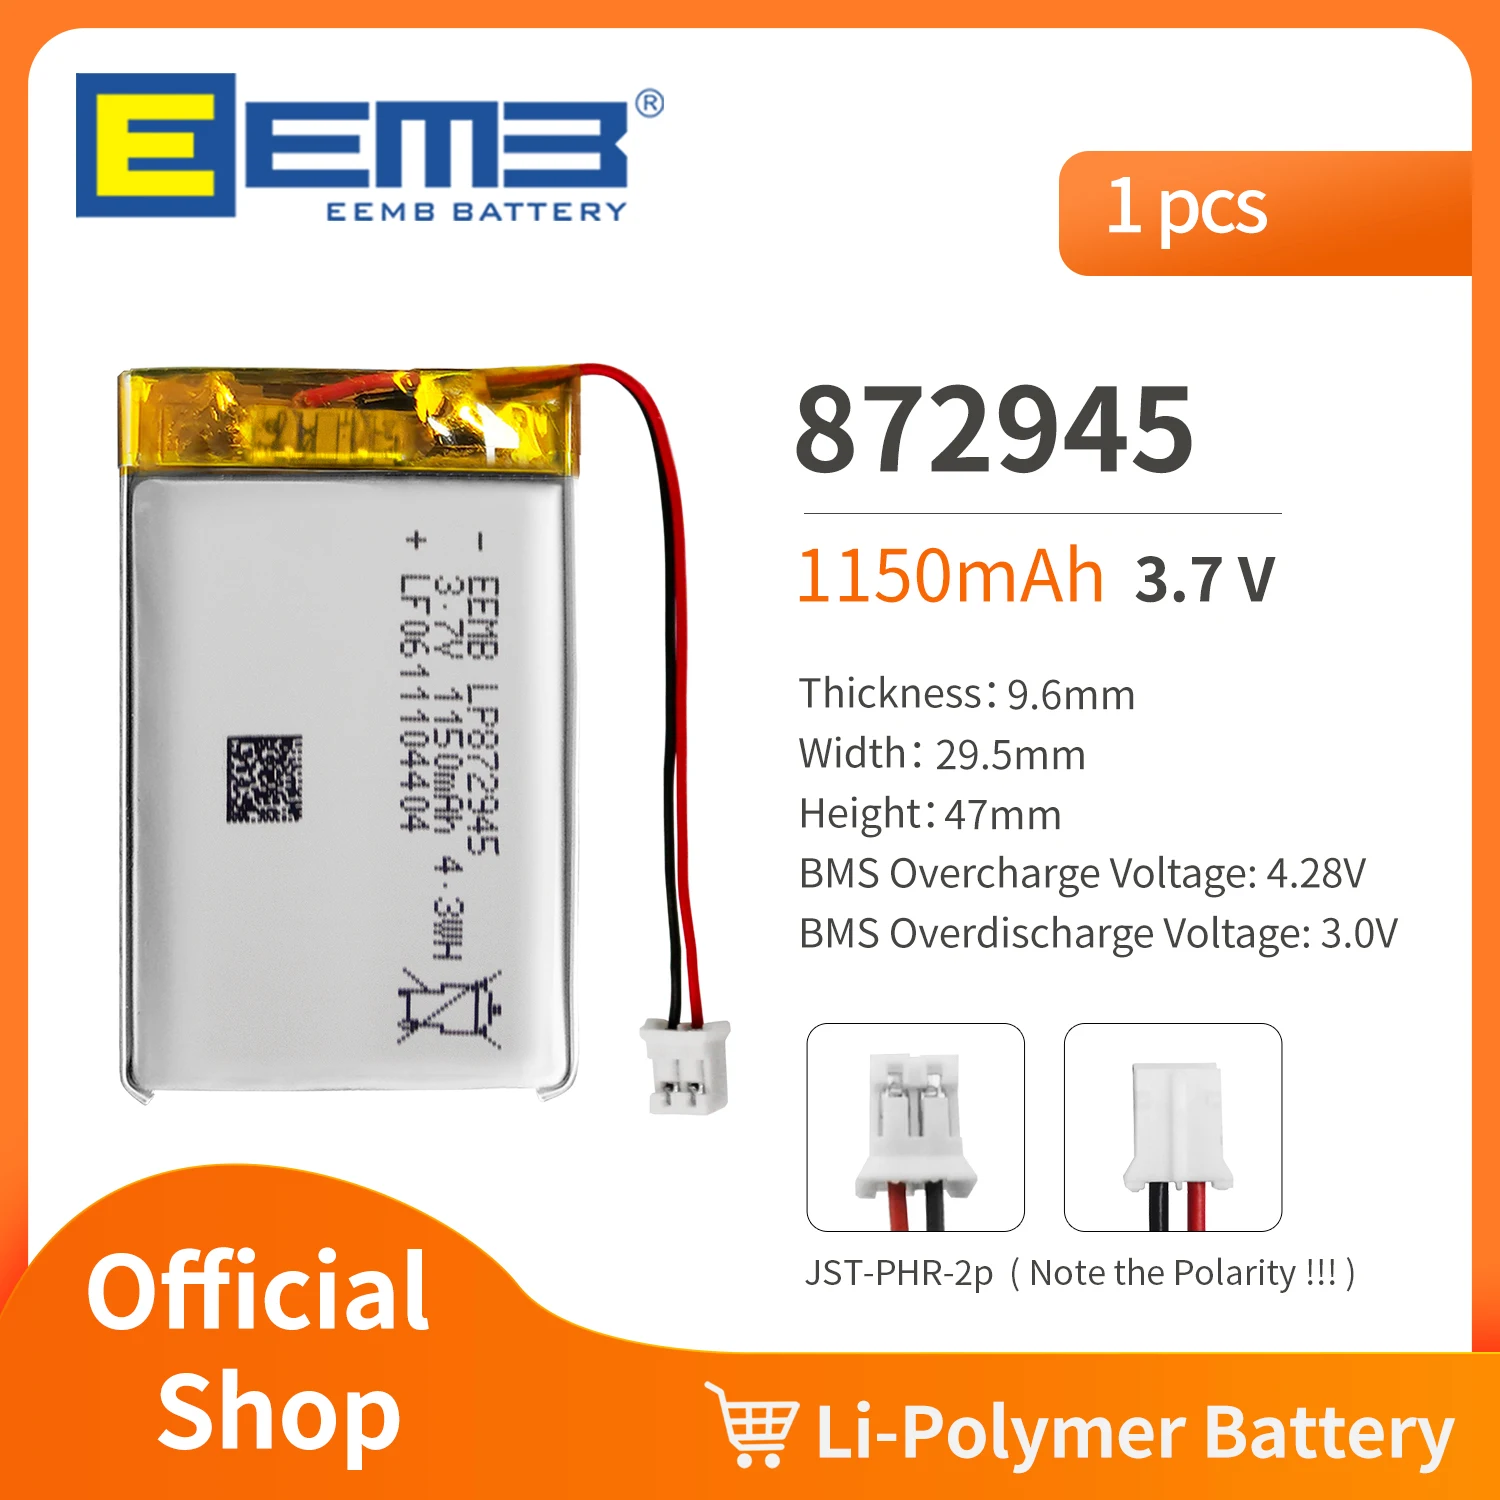 EEMB 872945 3.7V Battery 1100mAh Rechargeable Lithium Polymer Battery Pack For Dashcam,Flashlight,Bluetooth Speaker, GPS,Camera